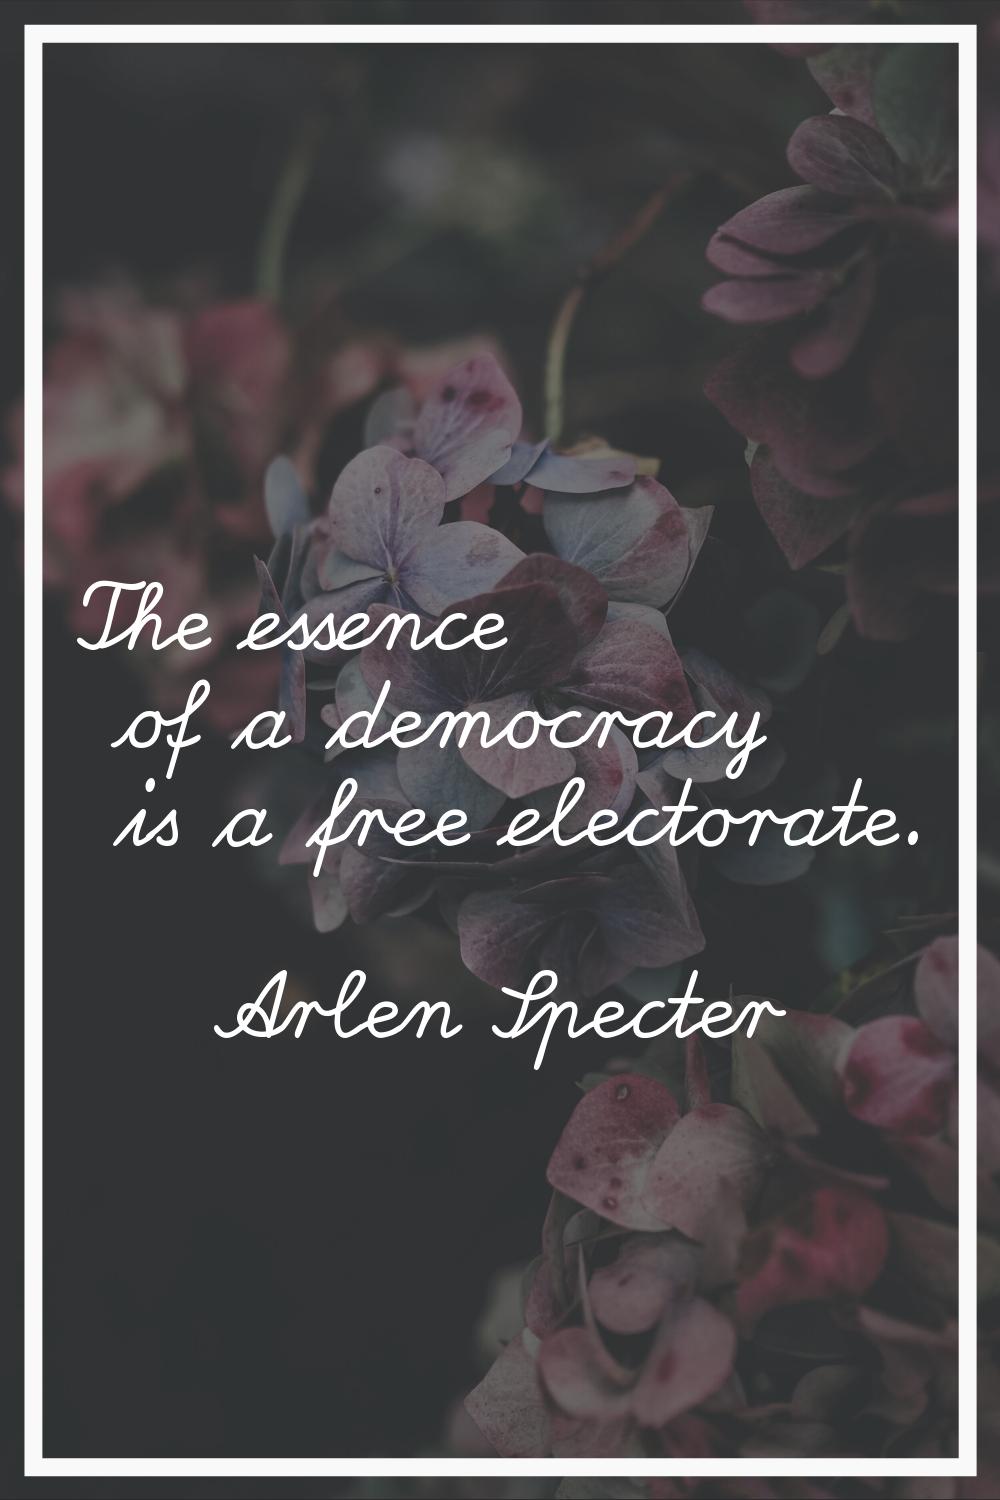 The essence of a democracy is a free electorate.